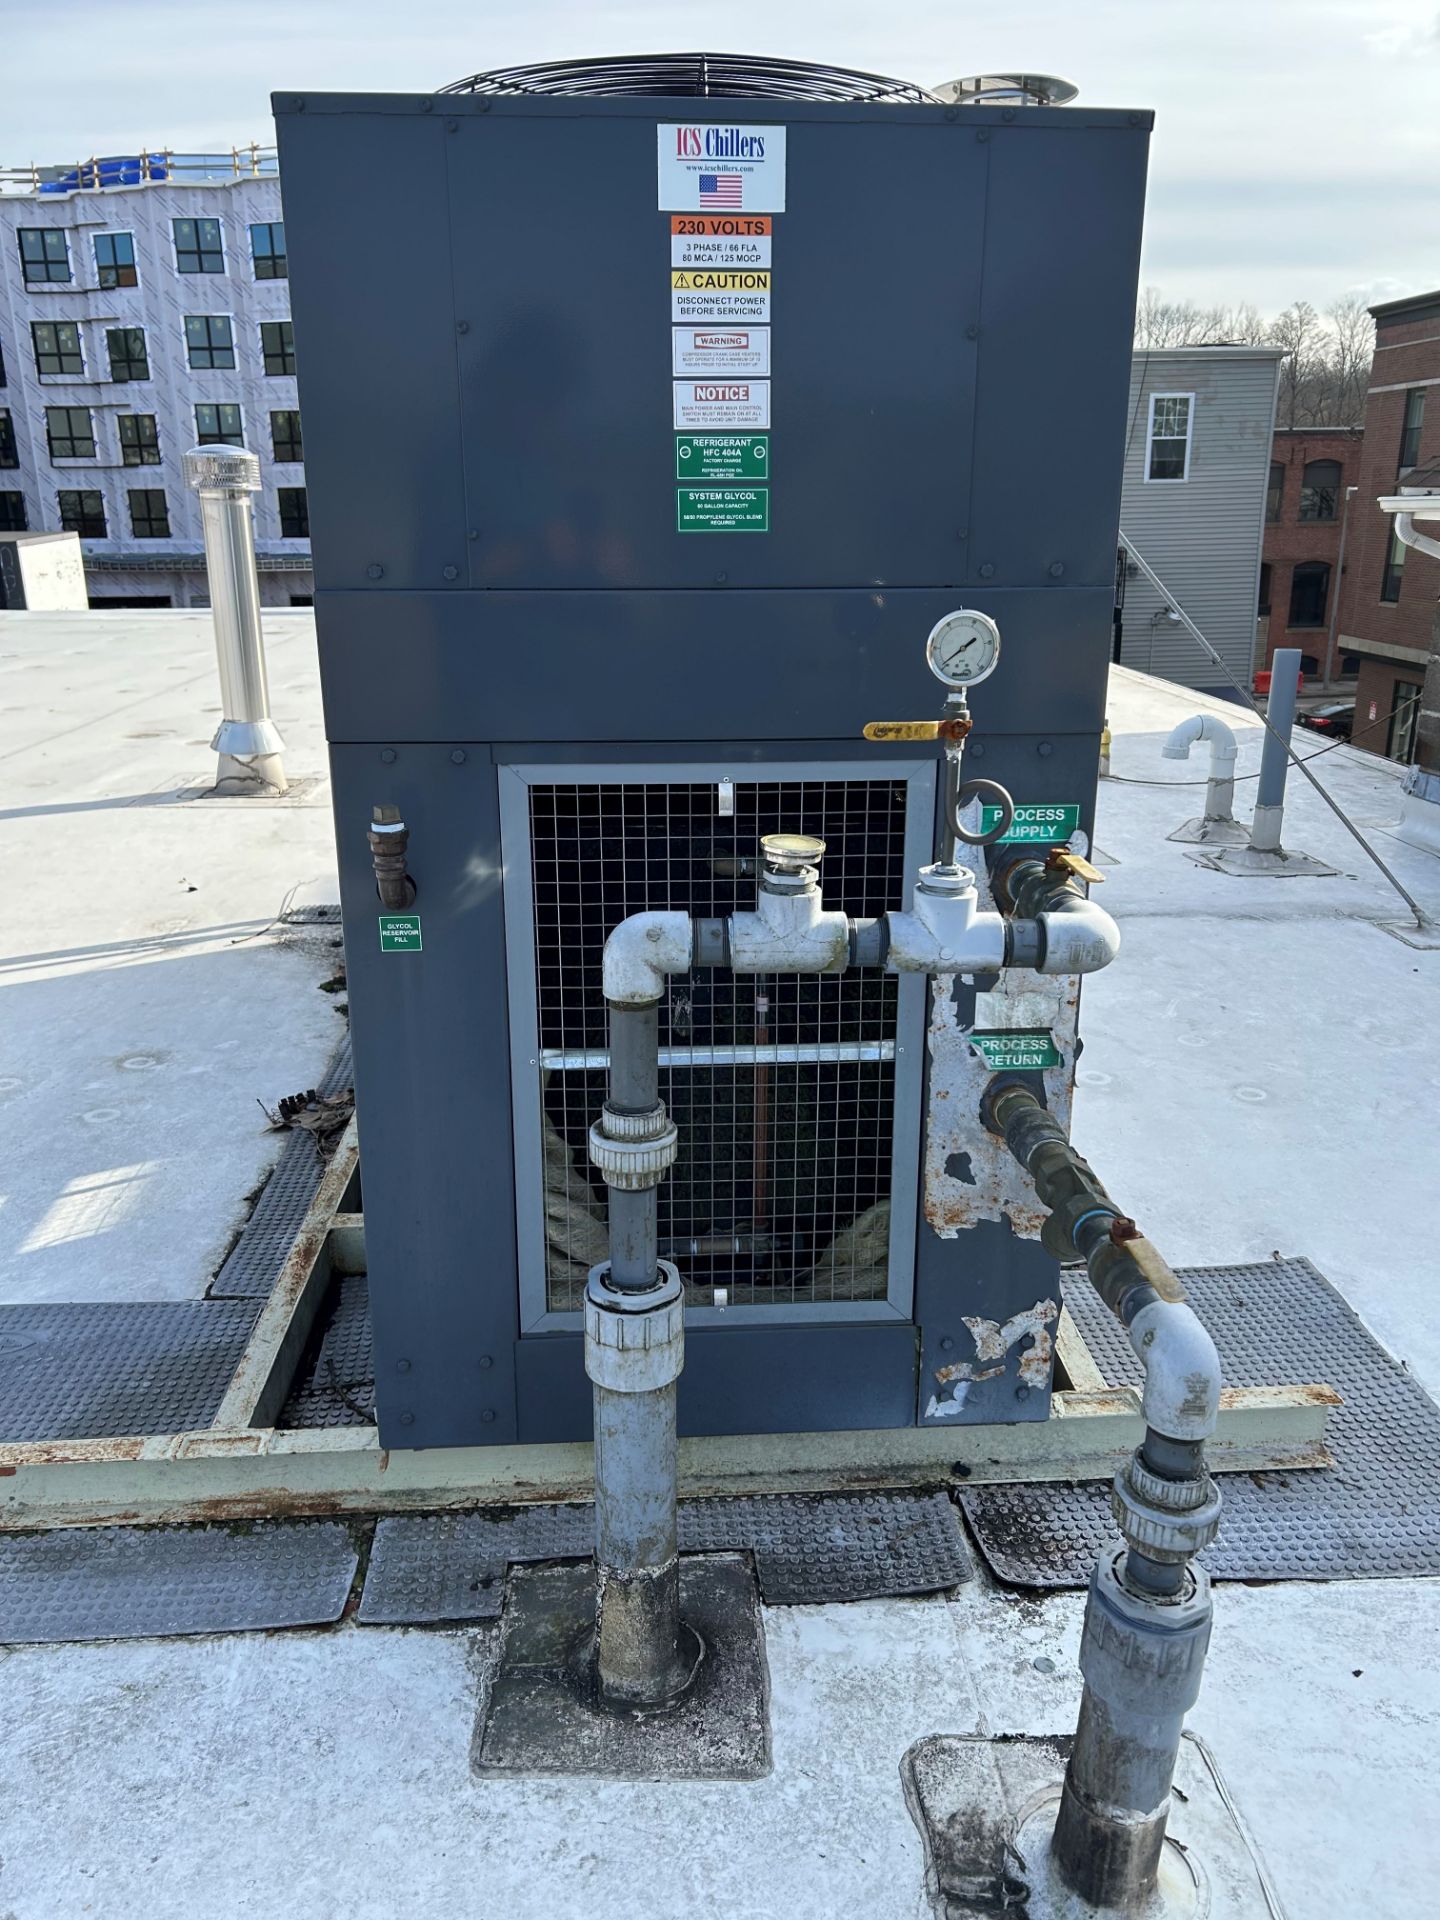 ICS Chillers Self Contained Glycol System, 230V, 3 Phase, HFC404A Refrigerant, Eaton Electrical - Image 6 of 6